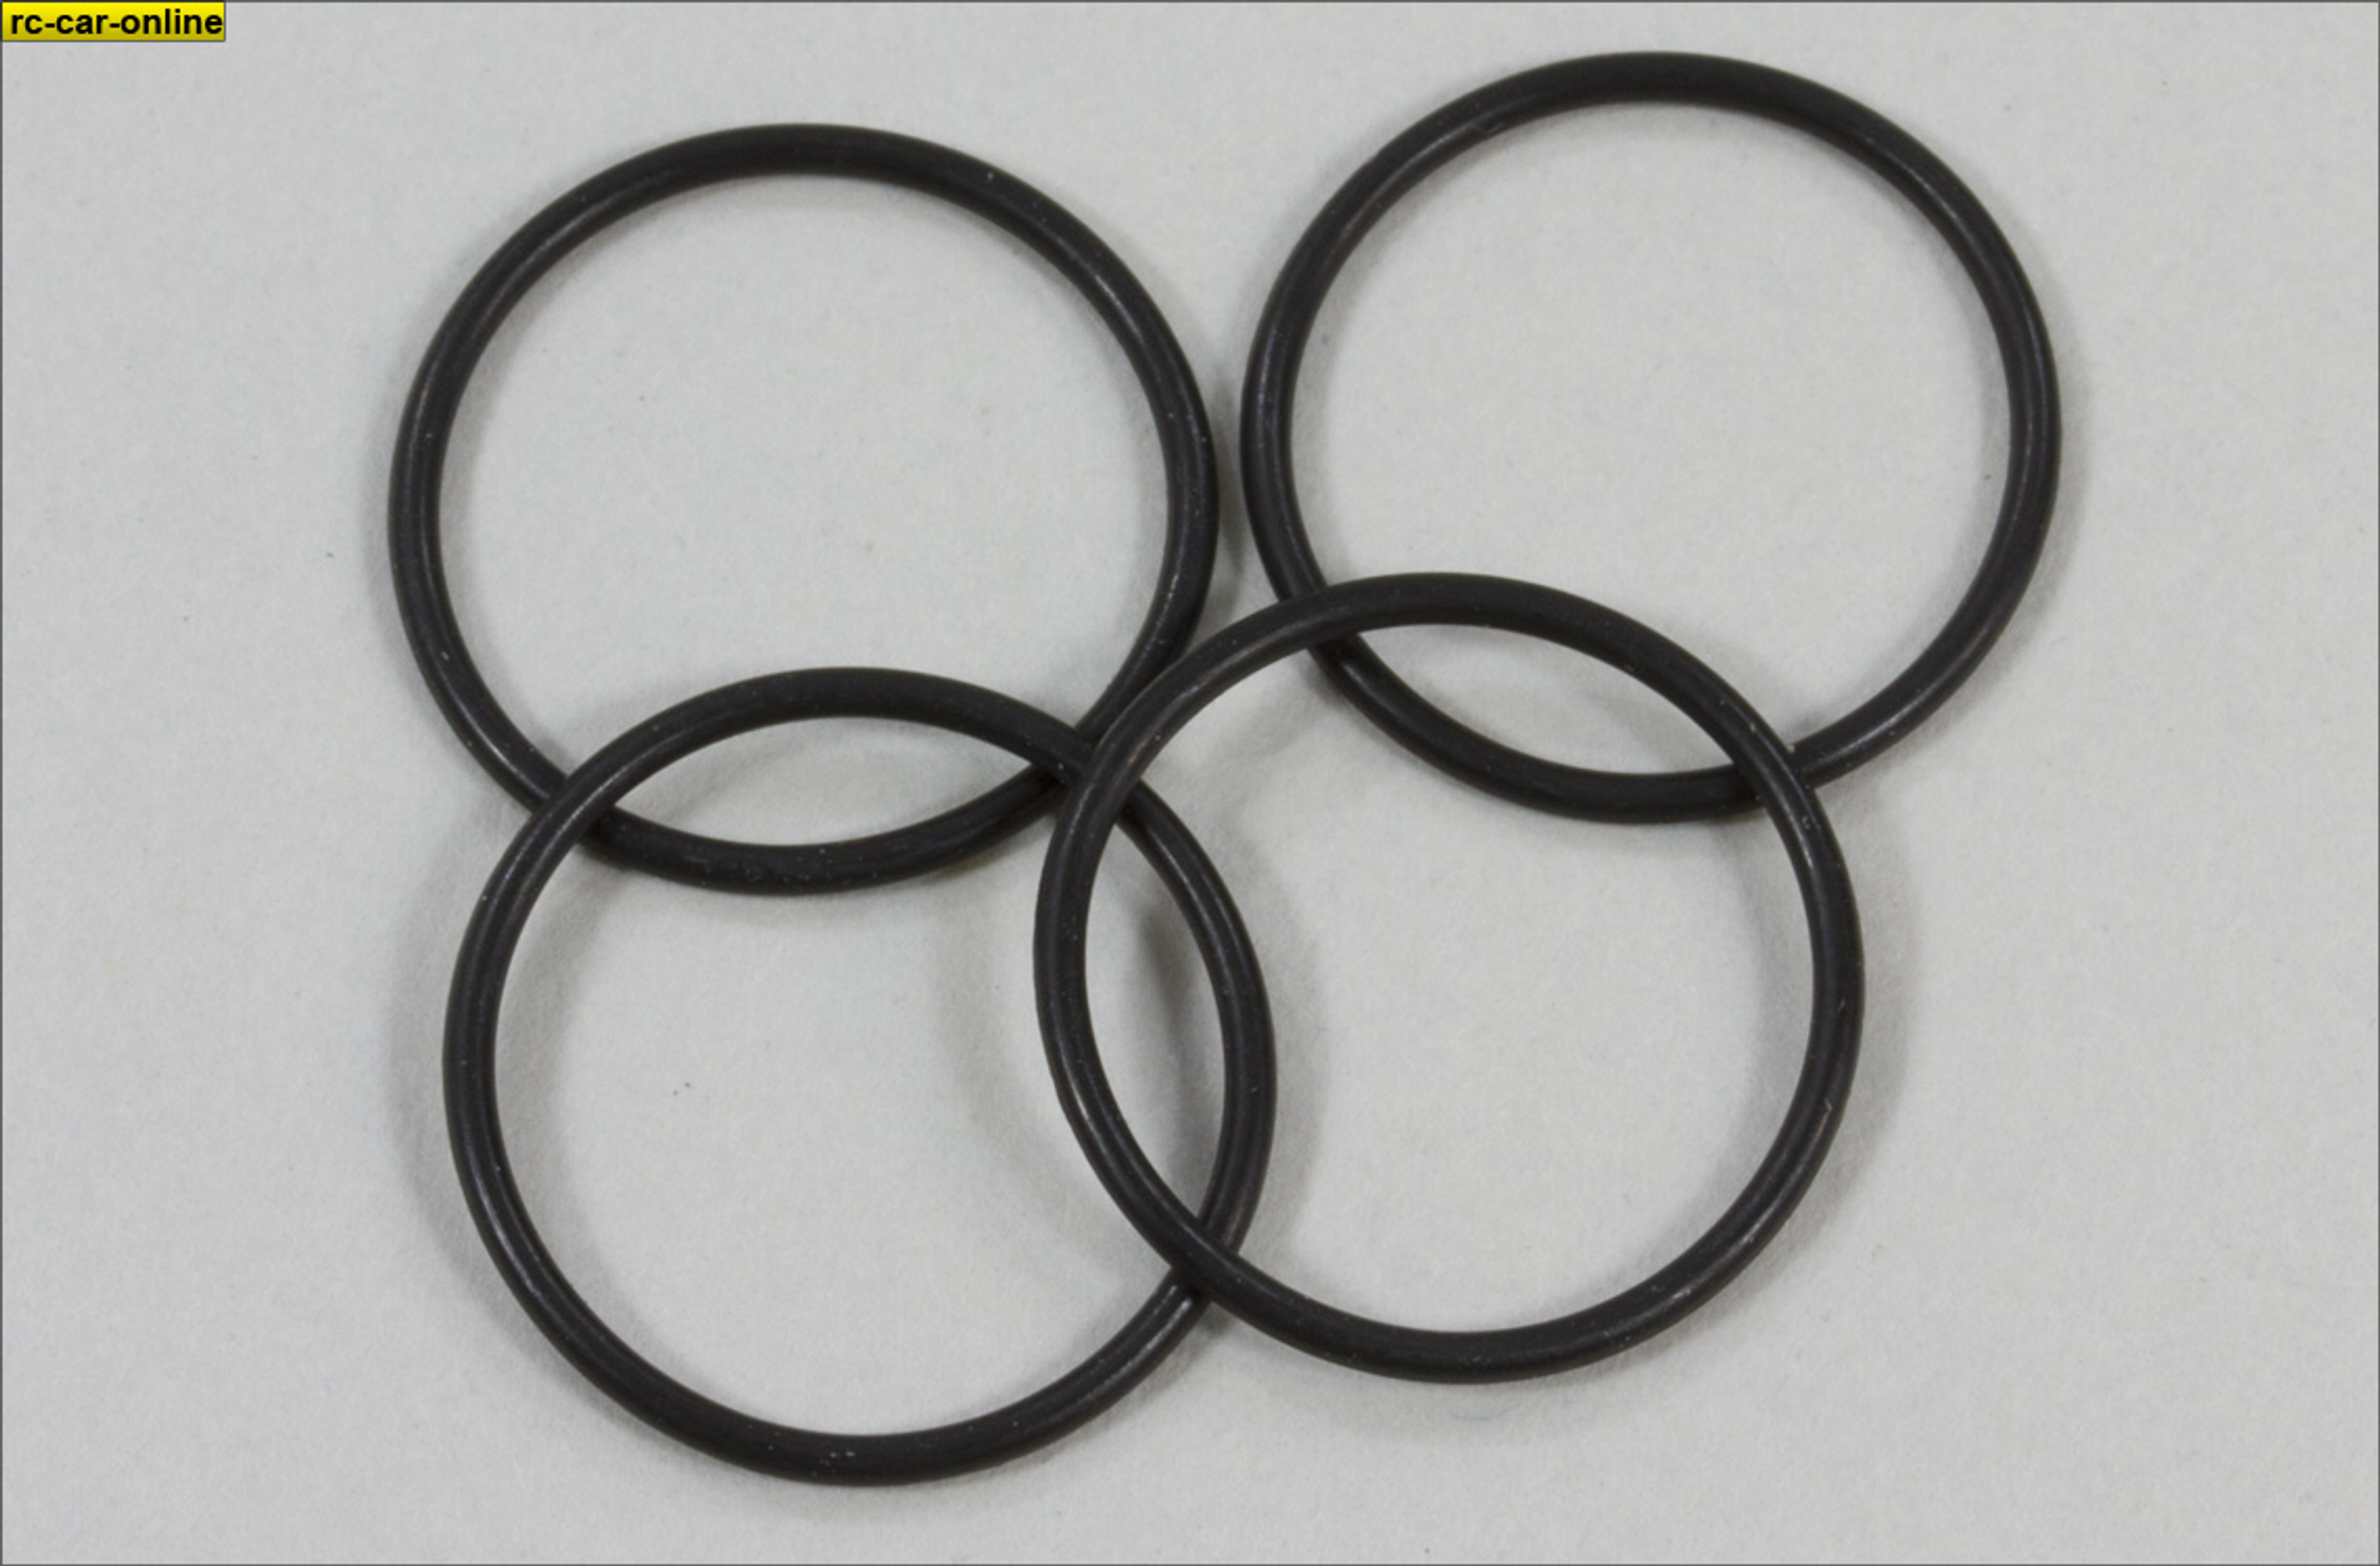 GPM Part 12 SCS12 o-ring for volume compensation piston, 14 x 1 mm, 4 pcs.